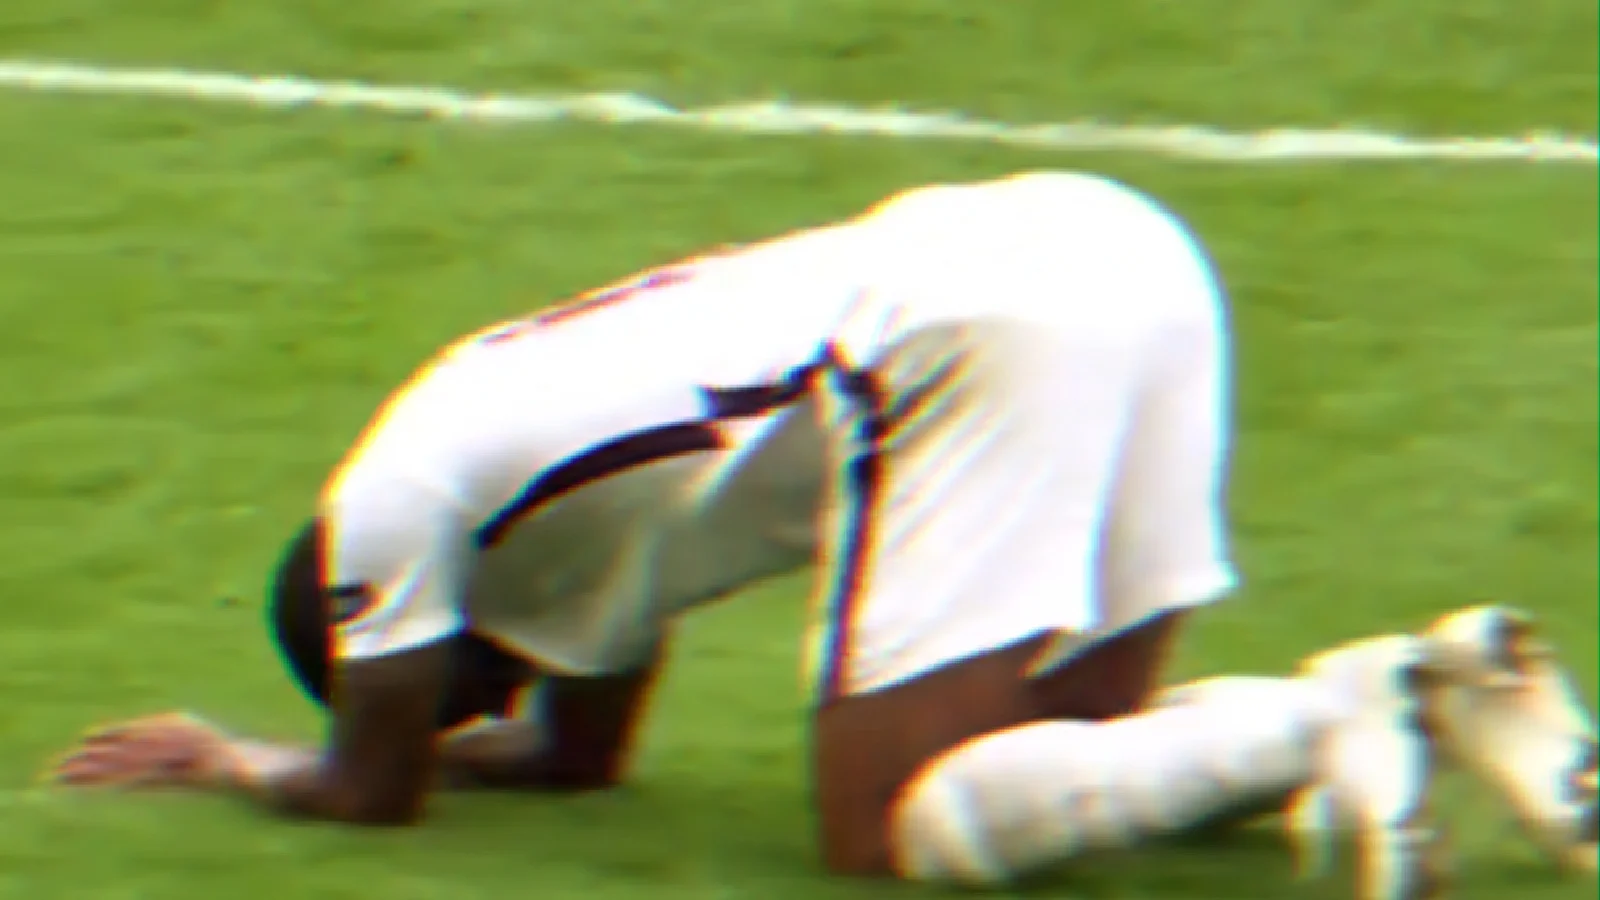 Raheem Sterling sinks to ground in relief after Thomas Muller's miss against England